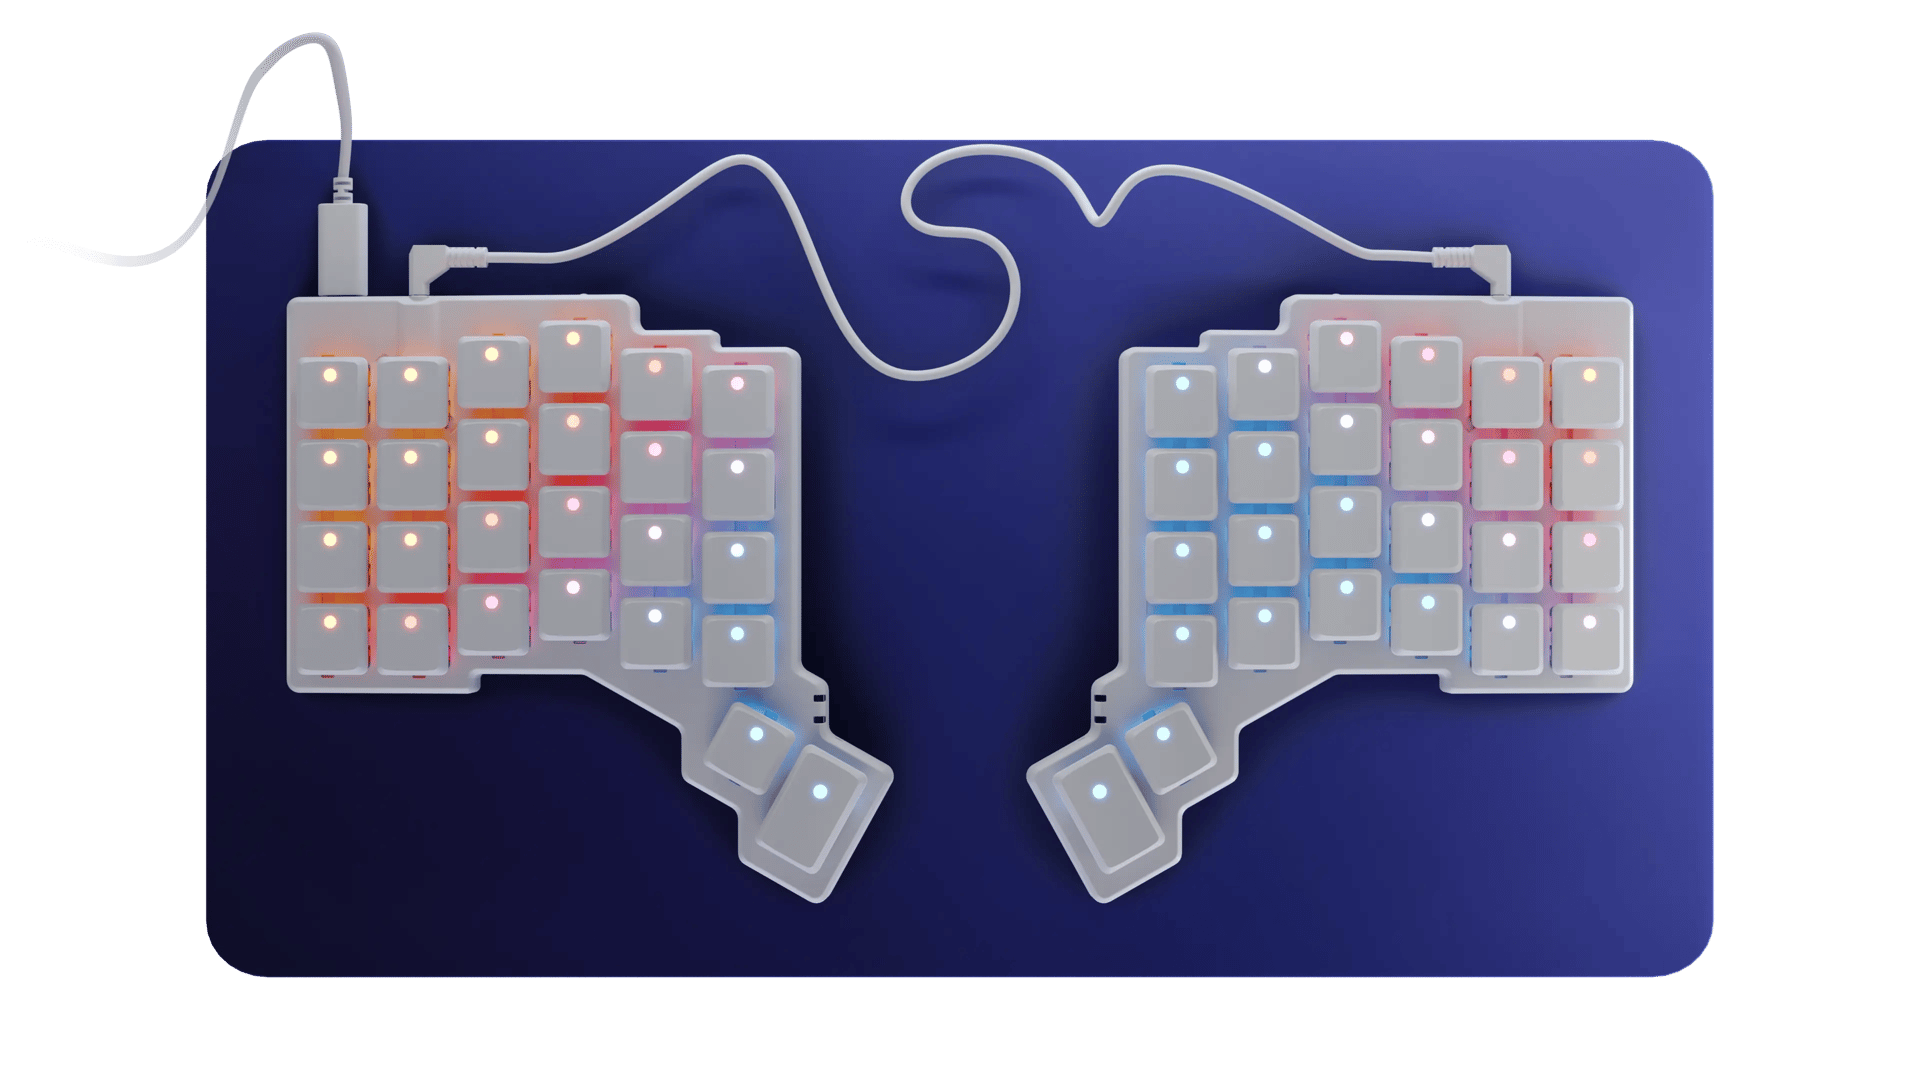 the light variant blank set of voyager keycaps